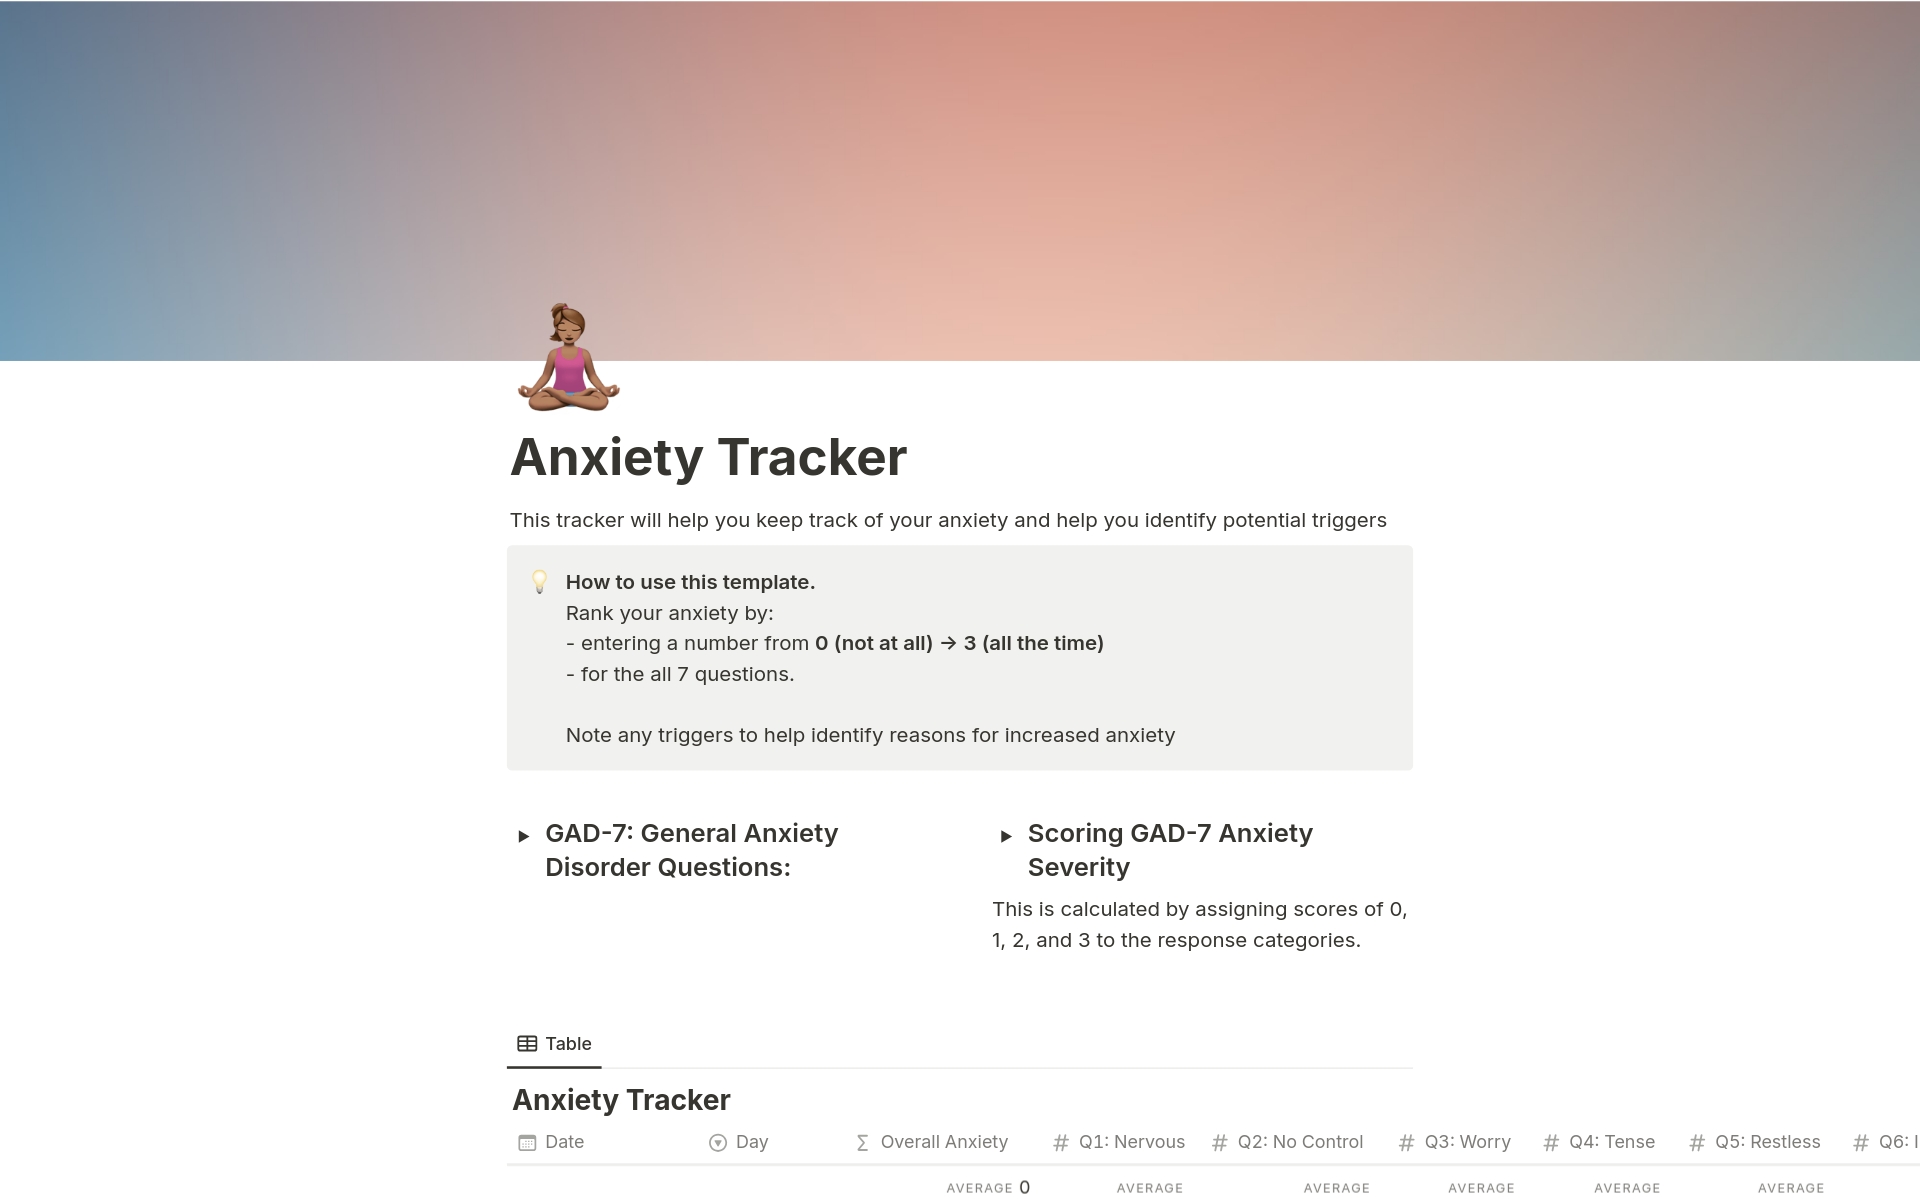 Using GAD-7 scoring this template will help track your anxiety levels